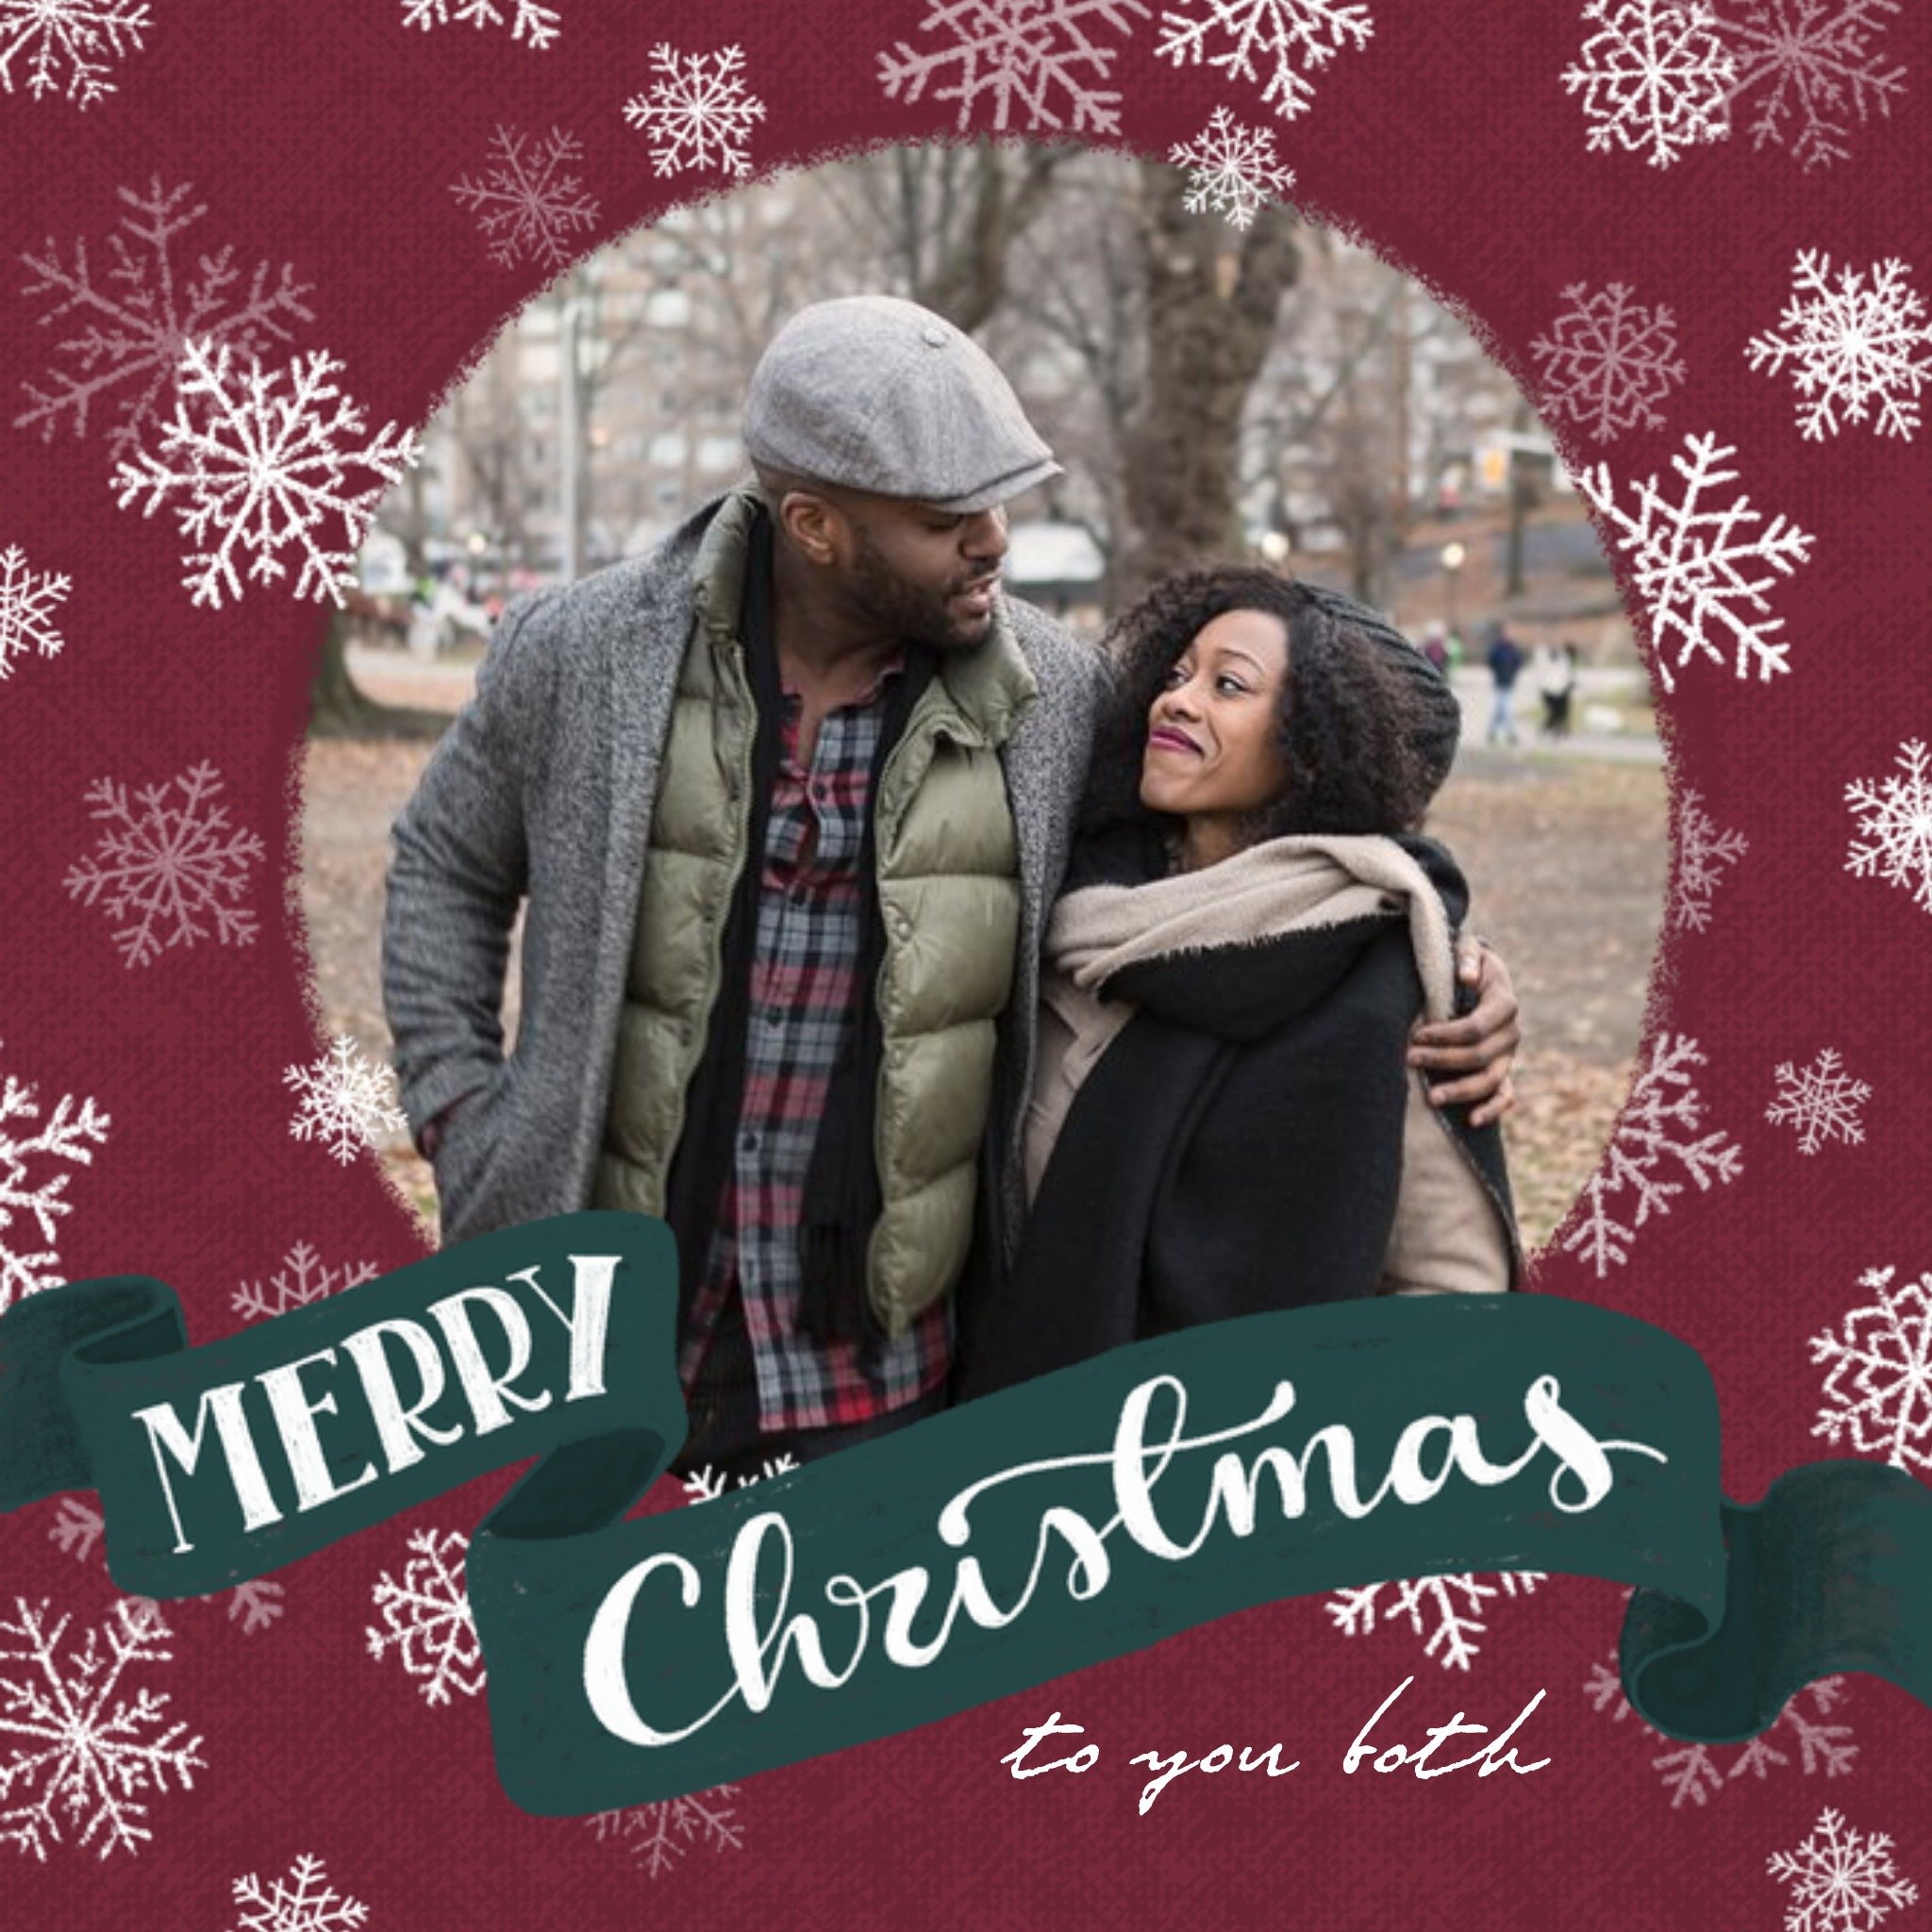 Moonpig Couples Christmas To You Both Snowflake Photo Upload Square Card, Large